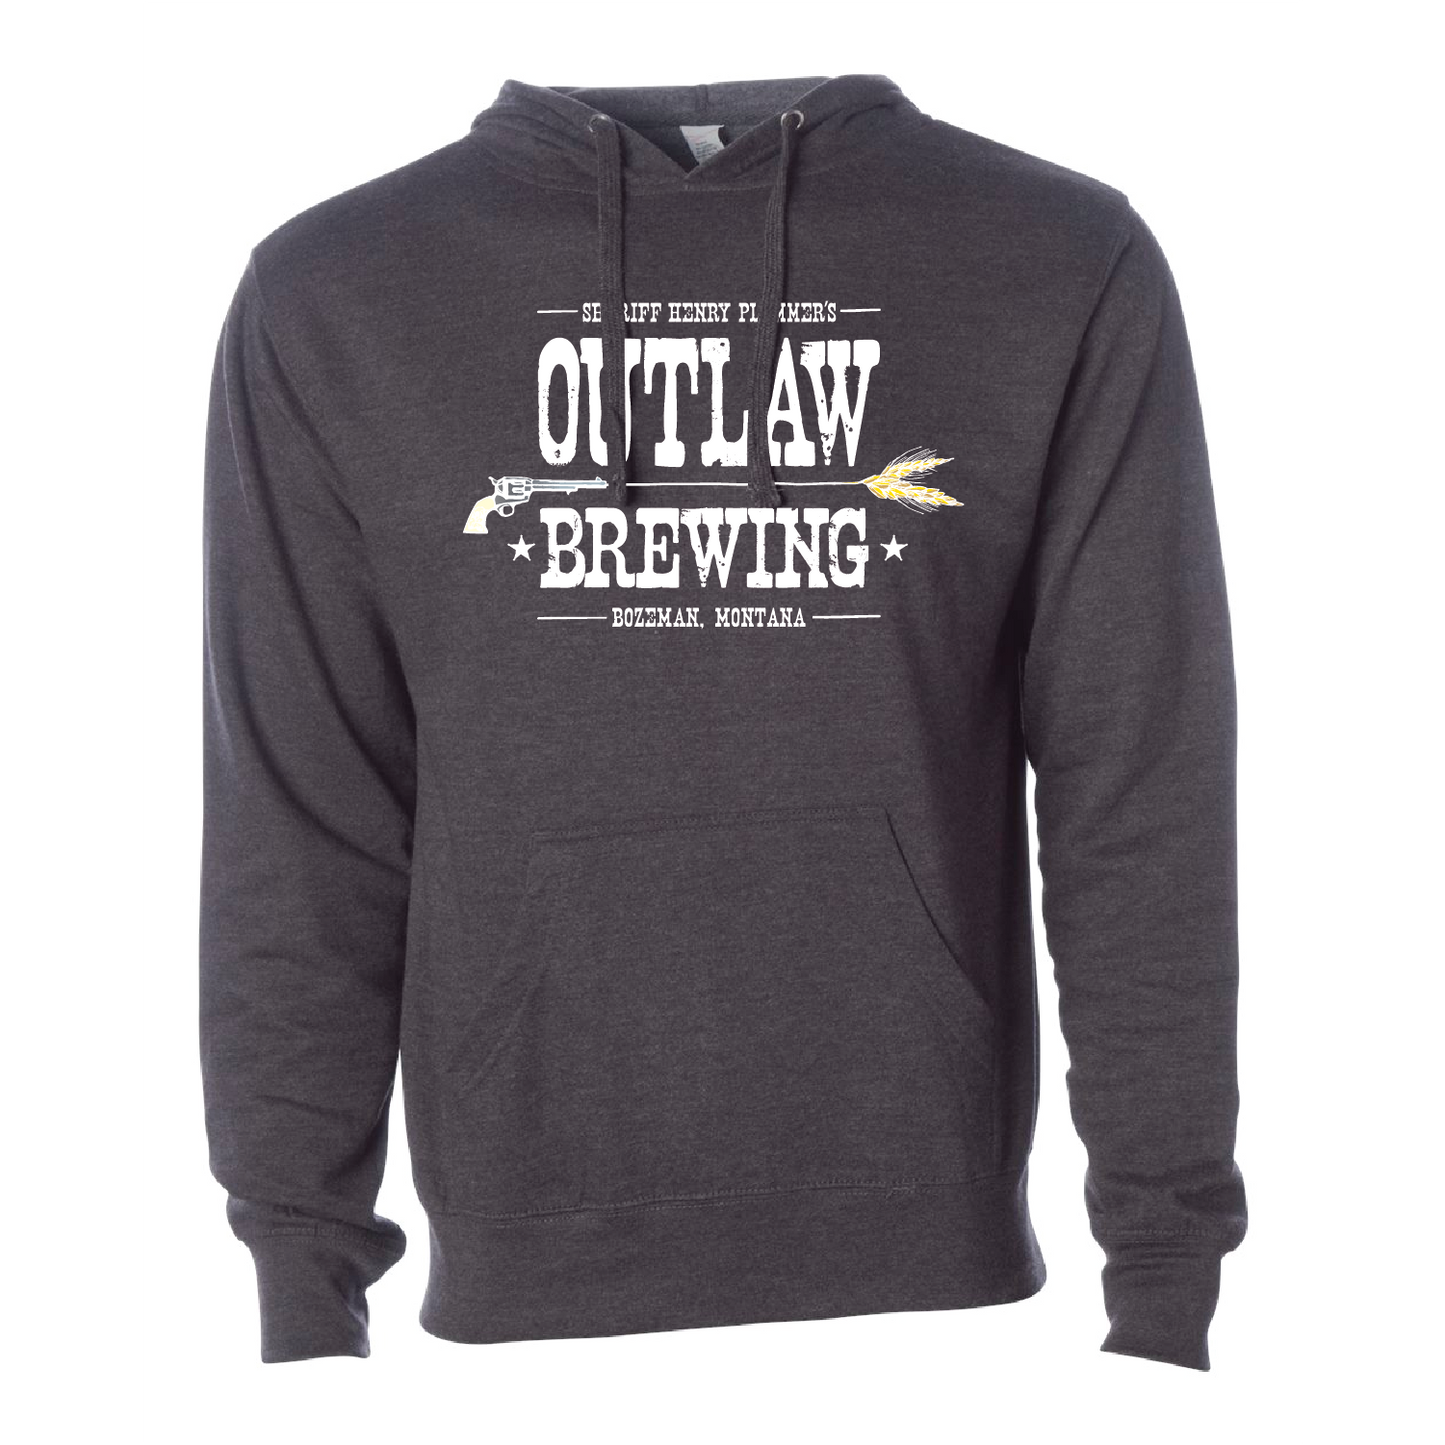 Outlaw Brewing Unisex Midweight Hooded Sweatshirt 2